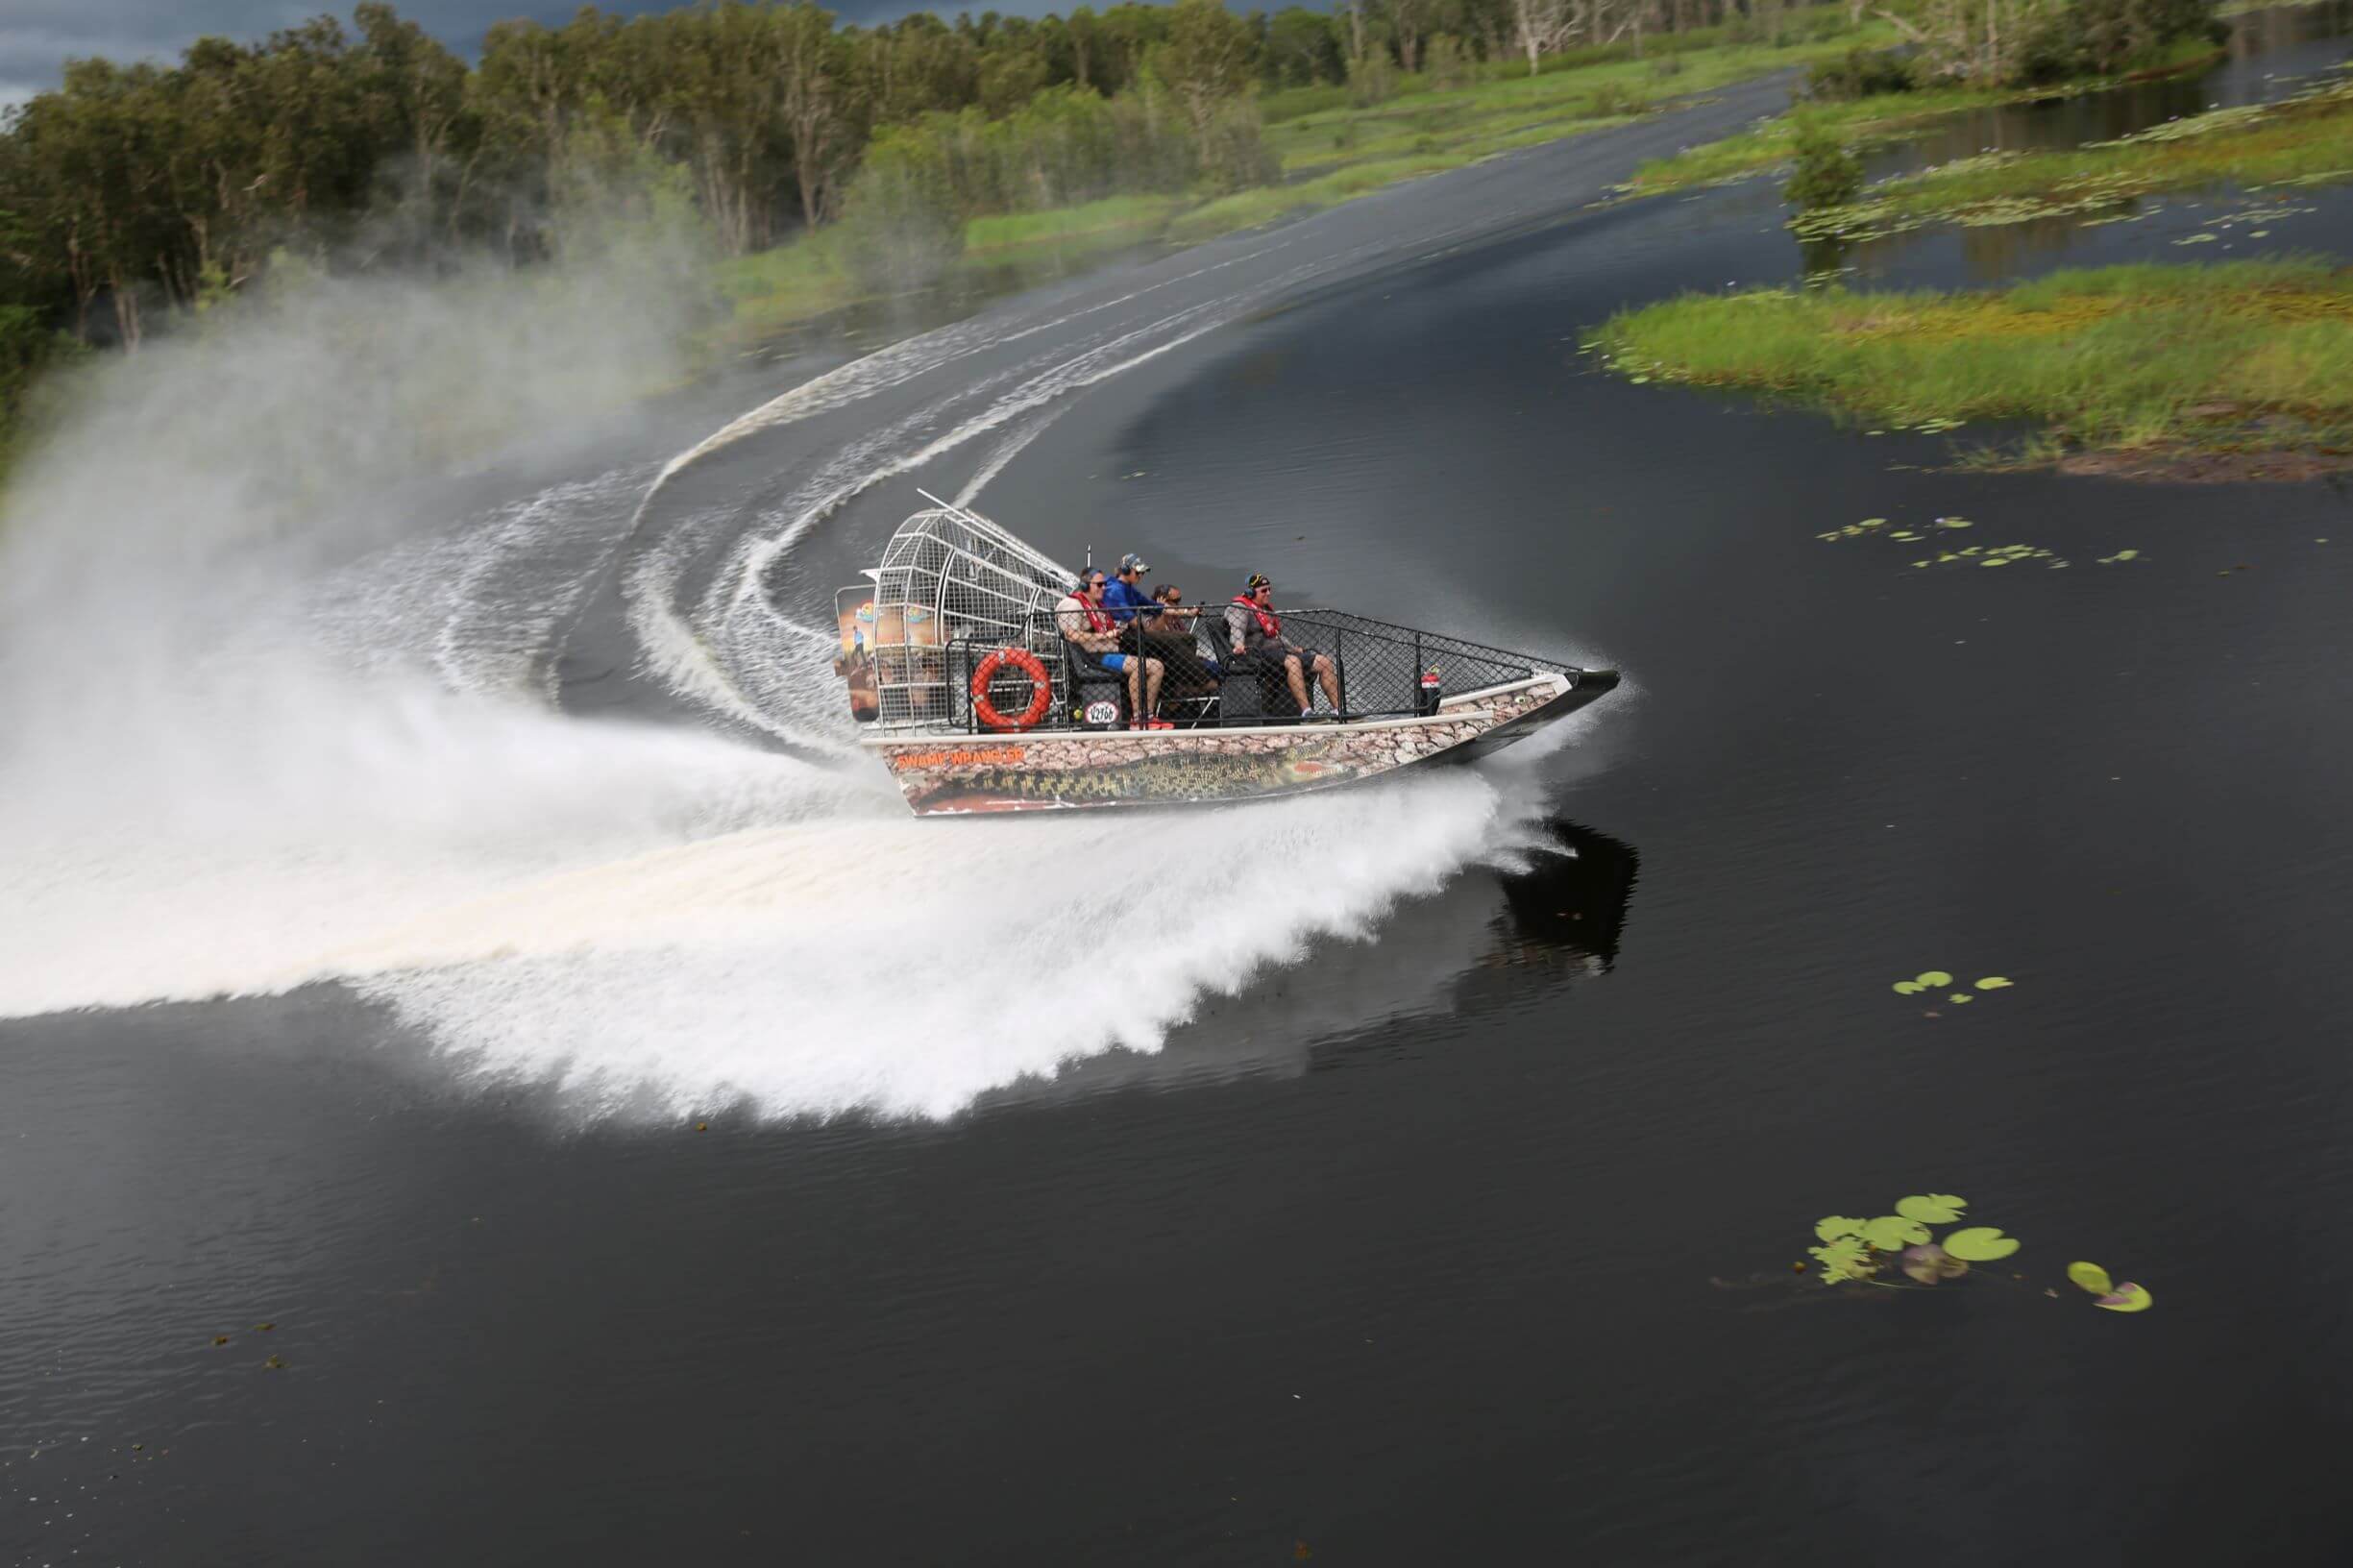 Image of Airboat On Body Of Water.